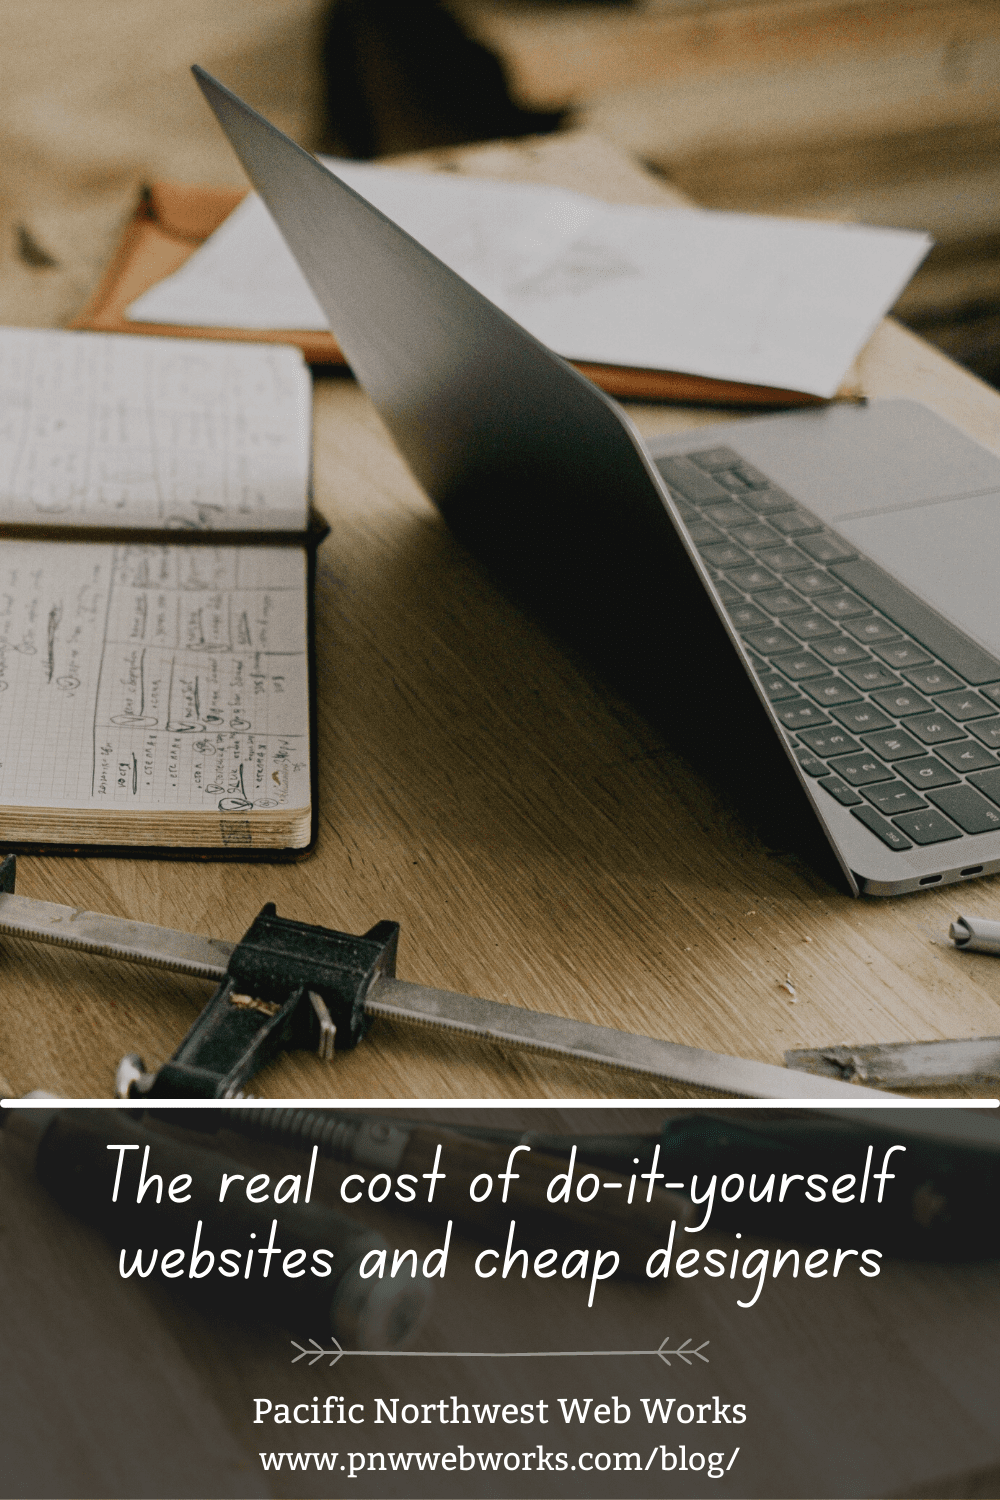 The real cost of do-it-yourself websites and cheap designers